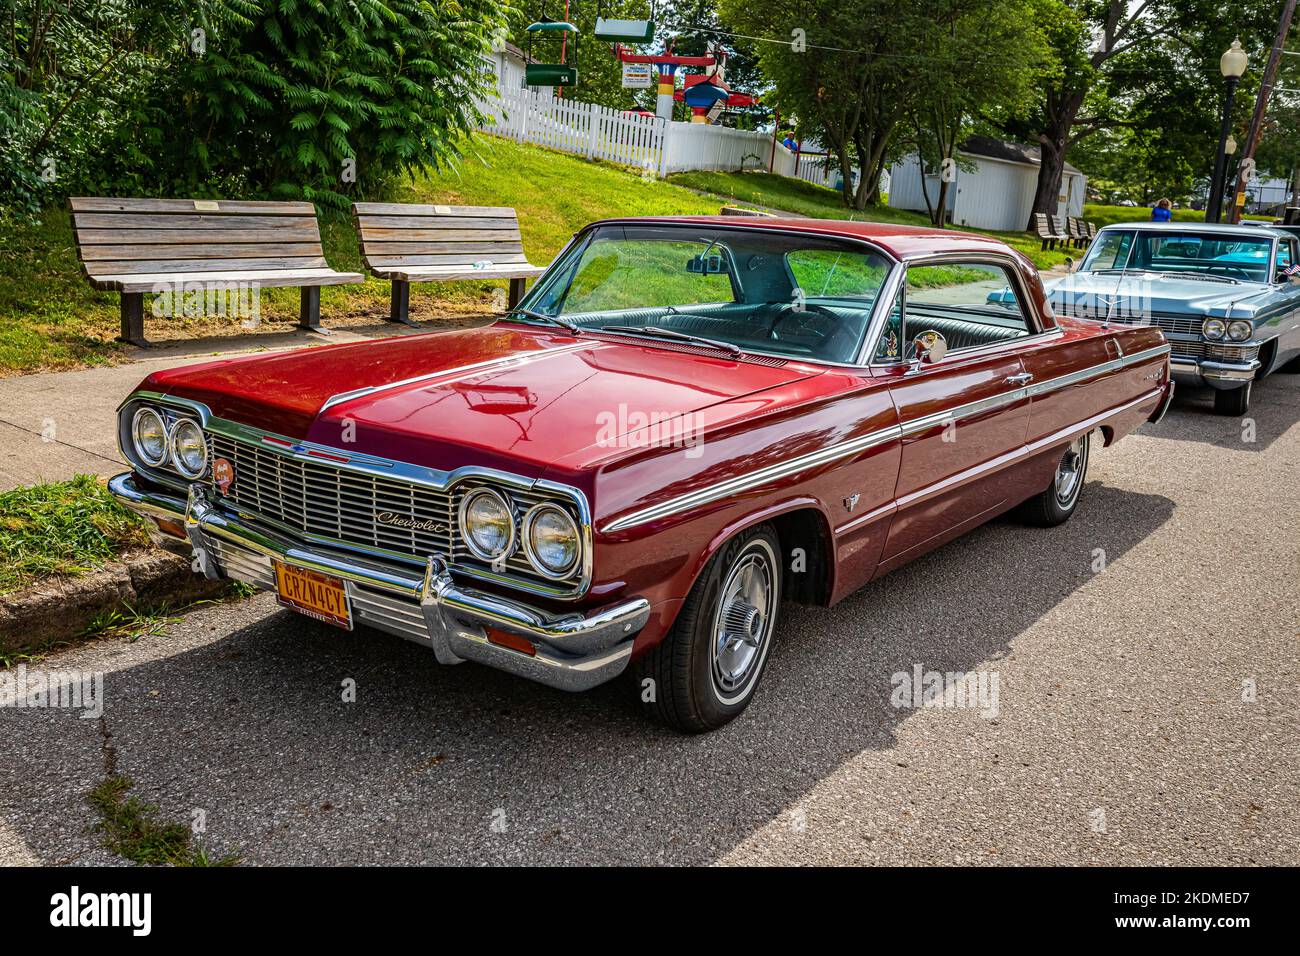 Des Moines, IA - July 02, 2022: High perspective front corner view of a 1964 Chevrolet Impala SS Hardtop Coupe at a local car show. Stock Photo